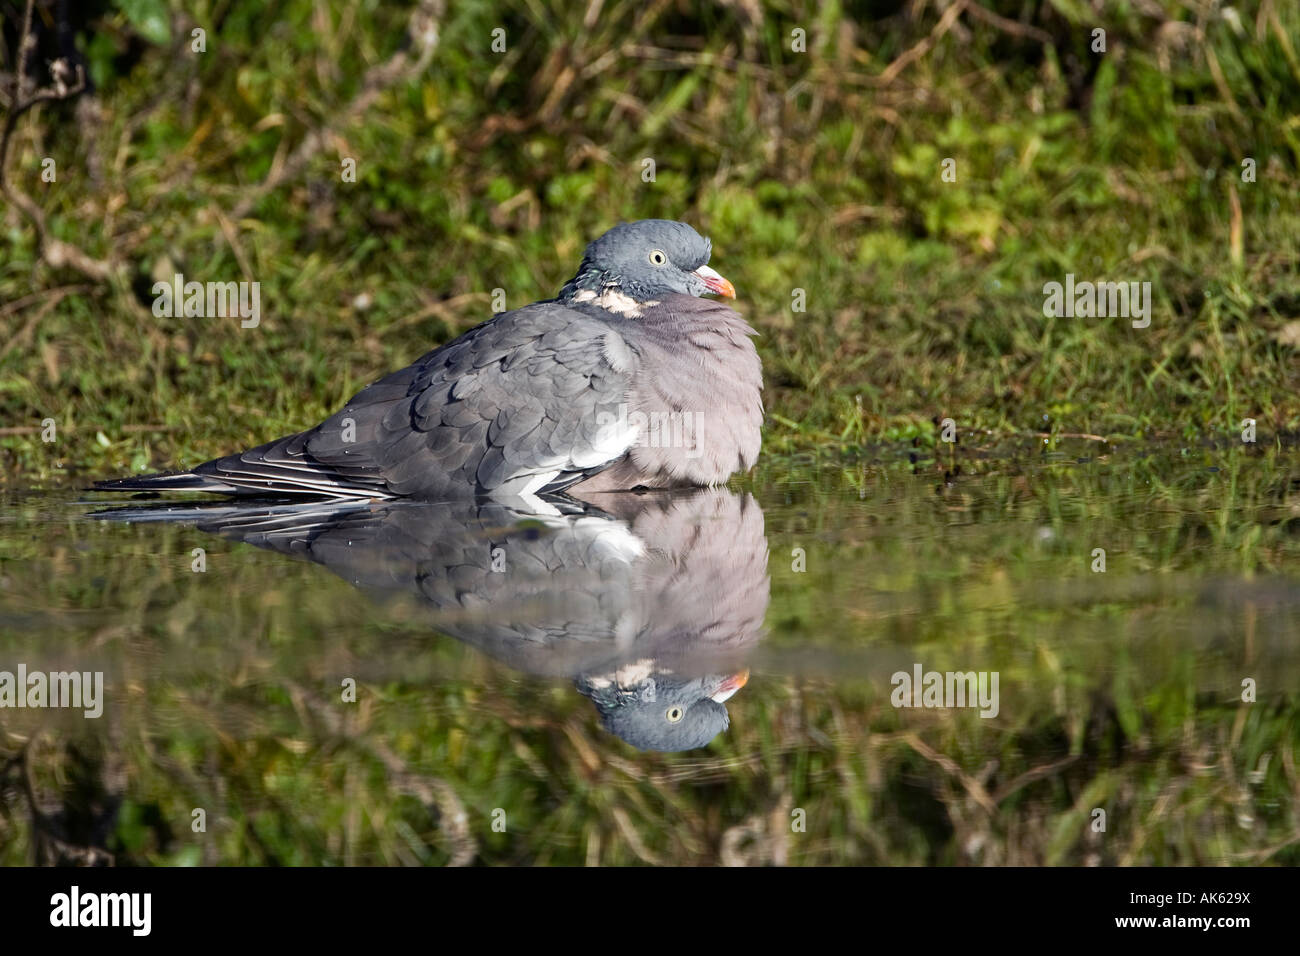 Wood Pigeon Columbus palumbus sat in water ready to bathe with refection in water Potton Bedfordshire Stock Photo